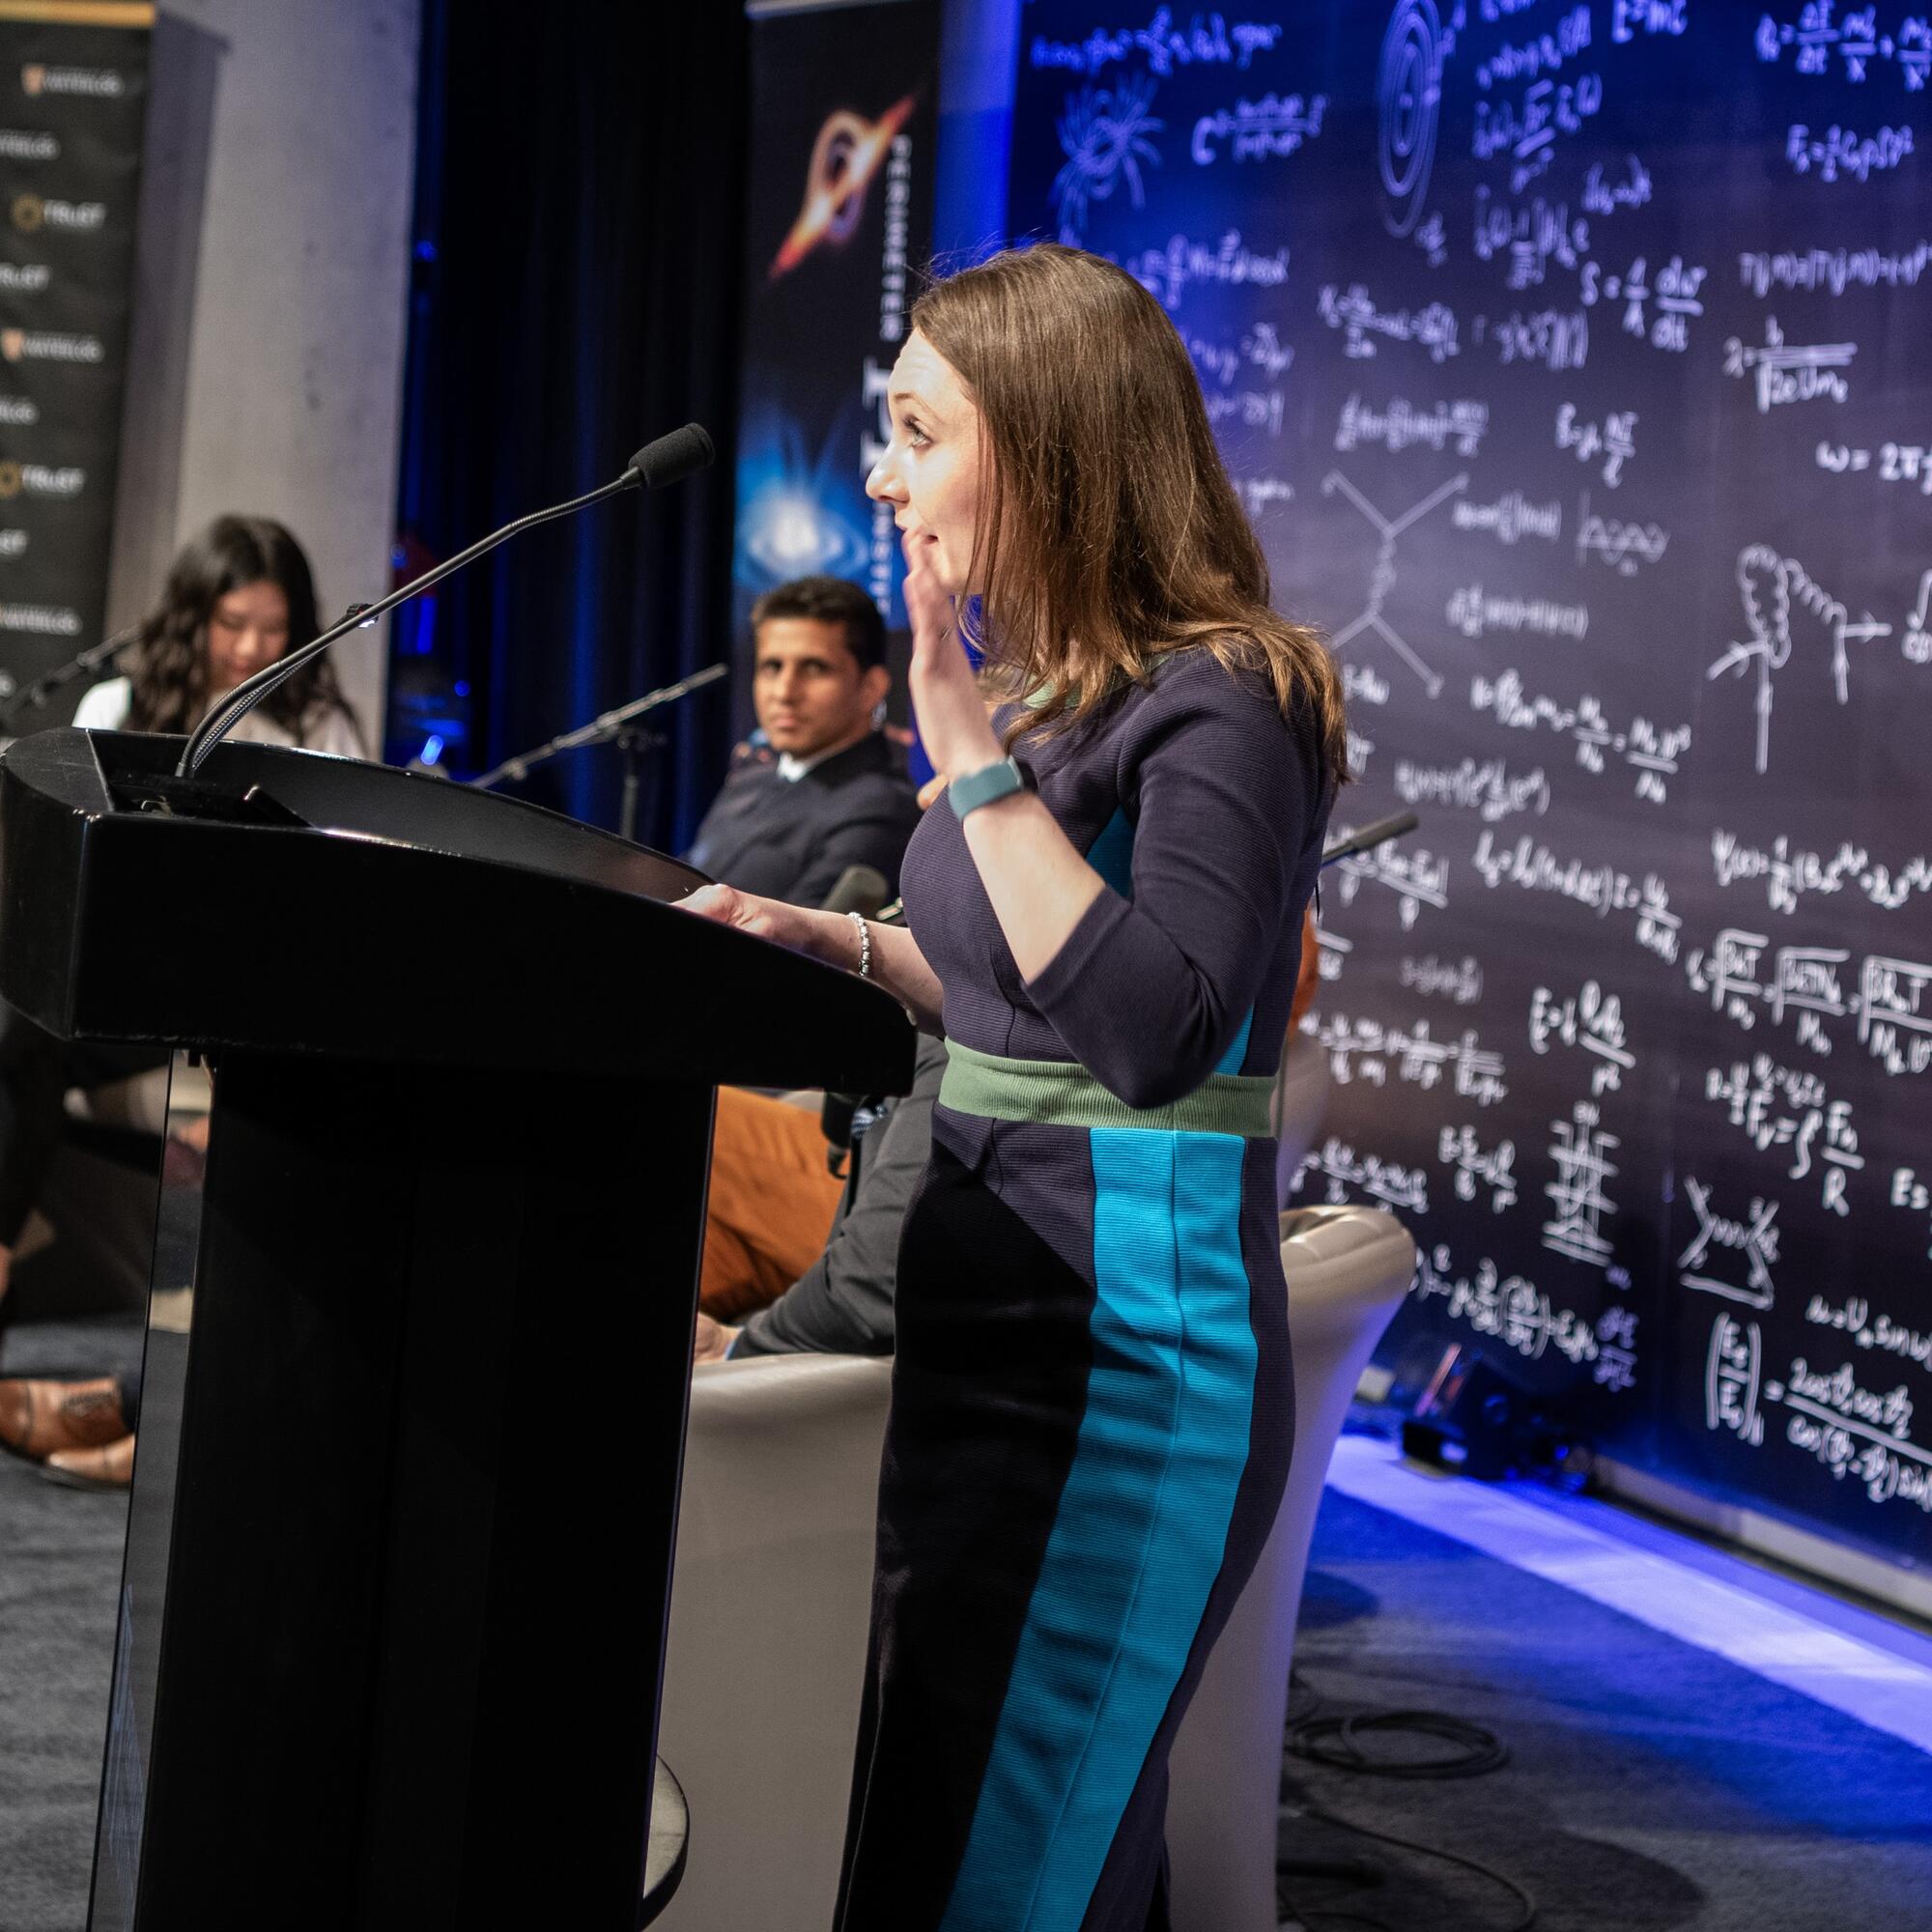 Ashley Rose Mehlenbacher standing at a podium at the Perimeter Institute for Theoretical Physics introducing an event.